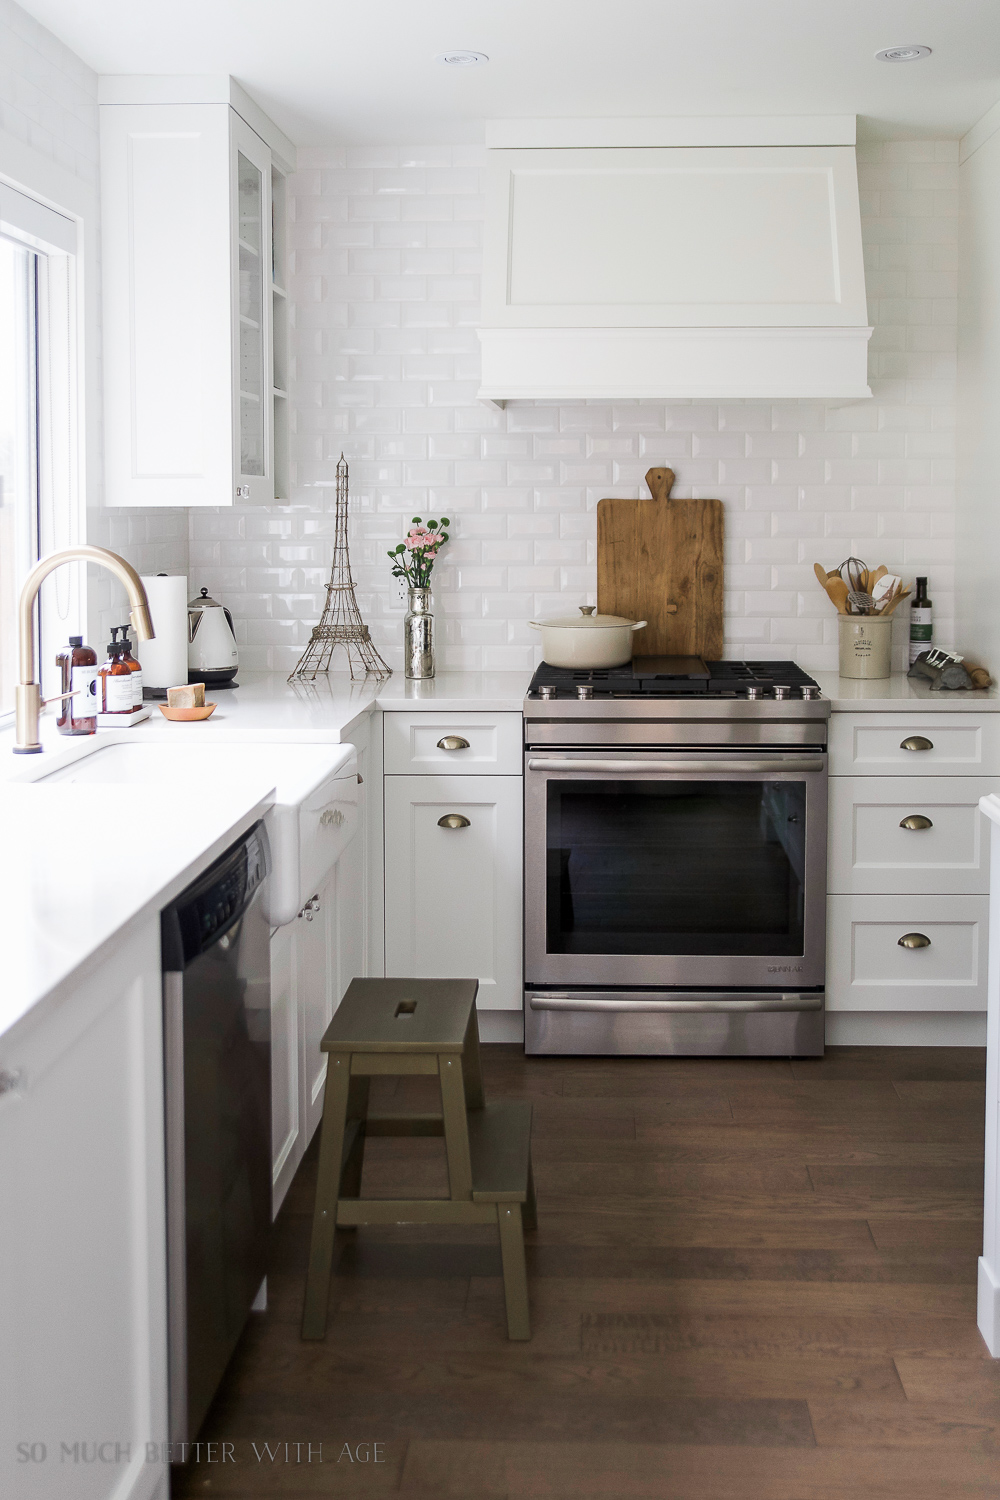 A white kitchen with an Eiffel Tower on the counter.